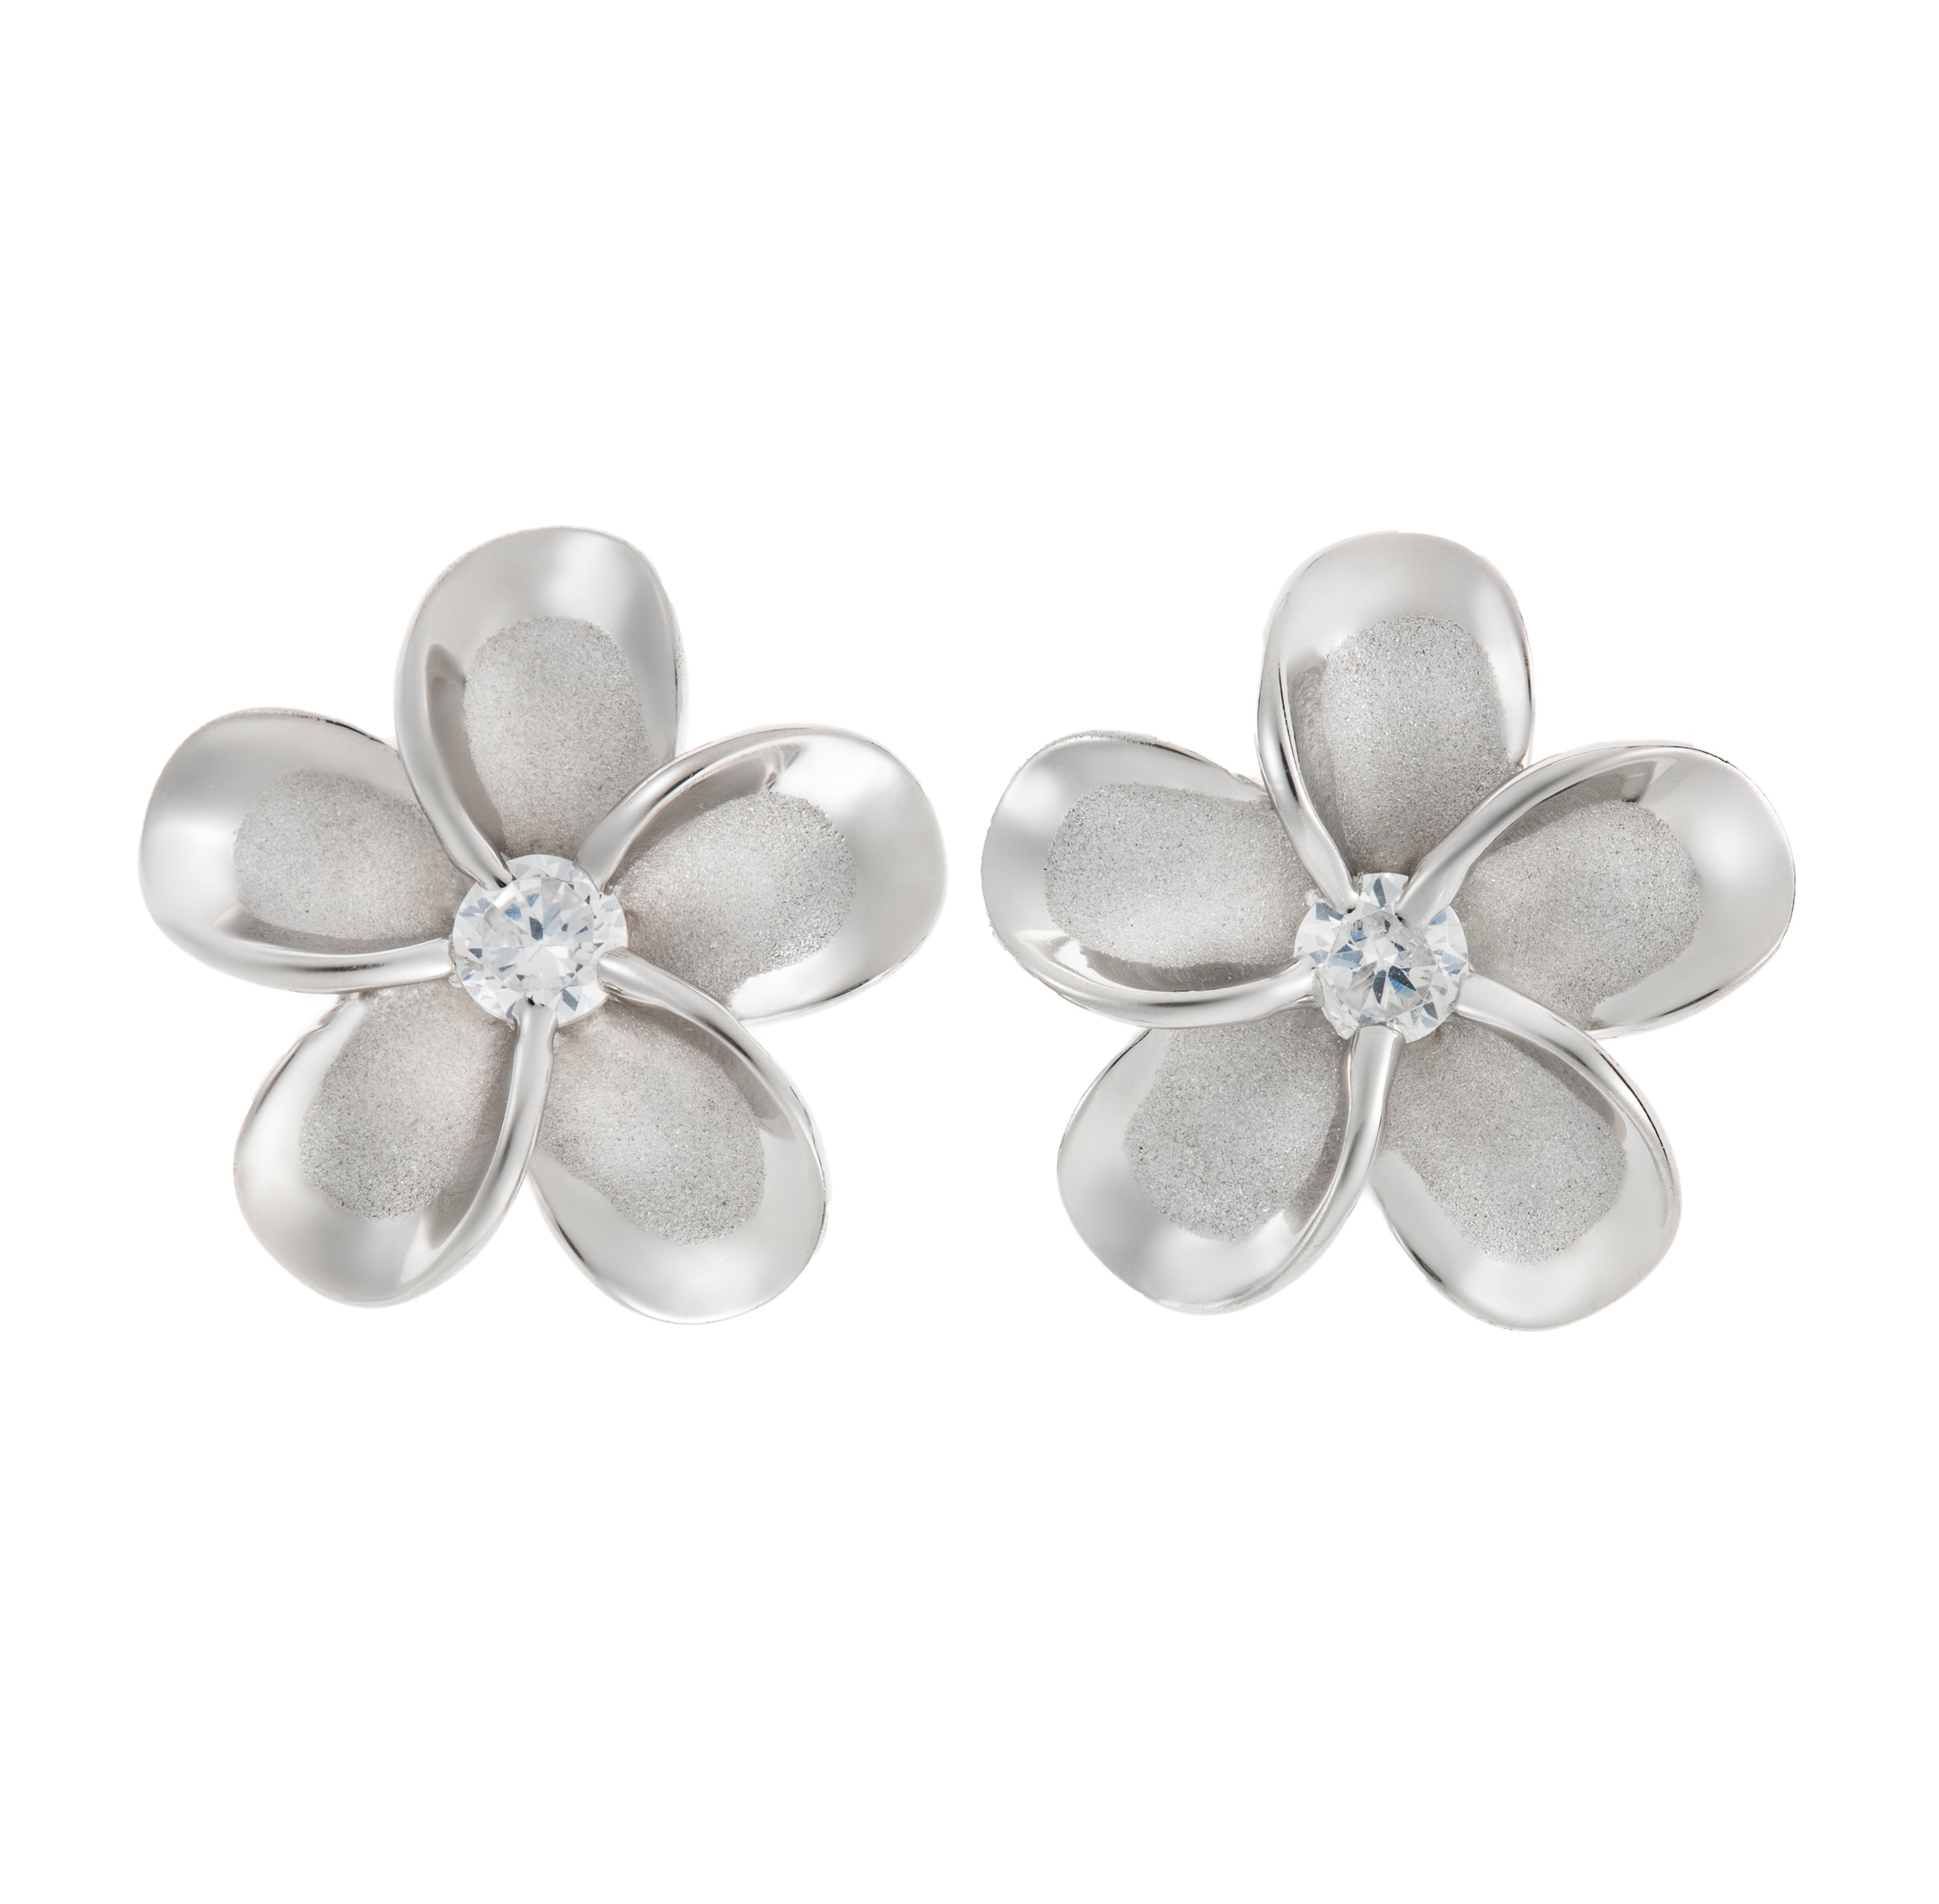 Moana Collection Sterling Silver Earring Stud: Solid Plumeria